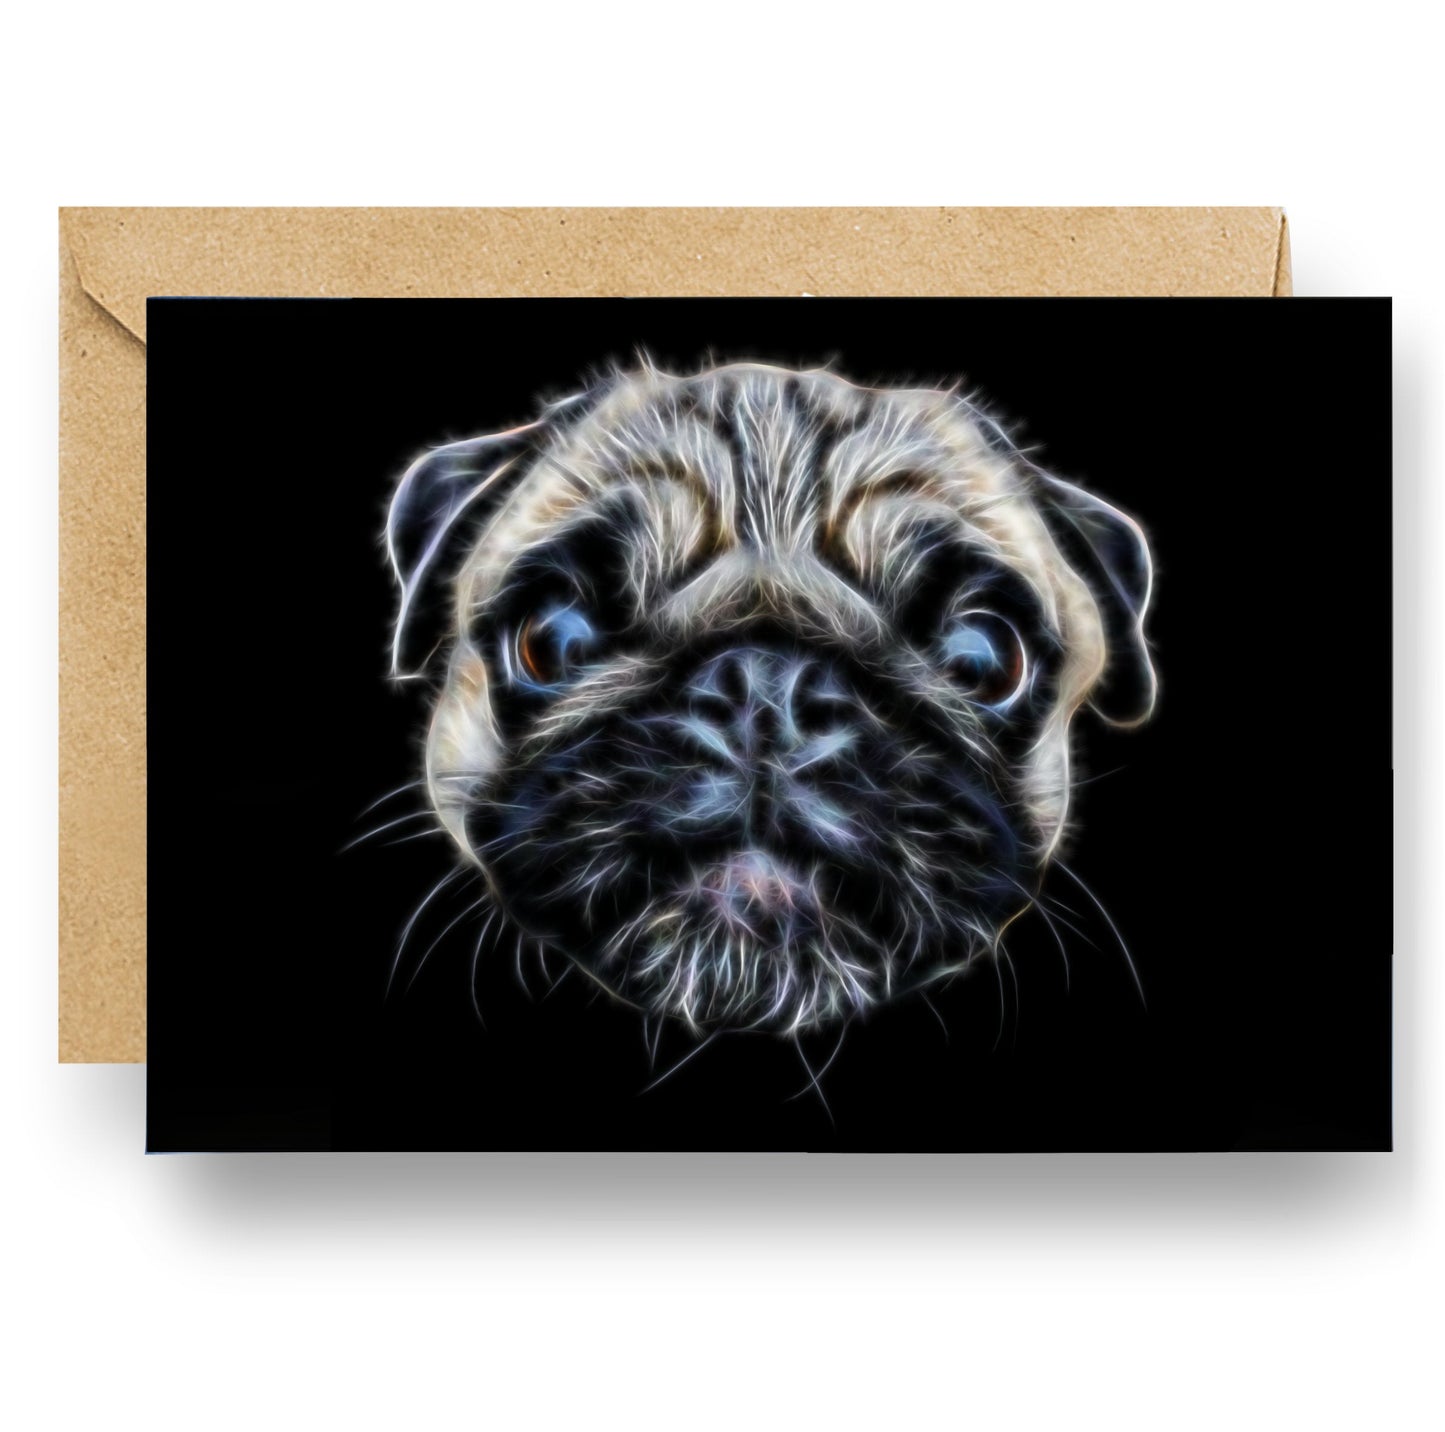 Fawn Pug Greeting Card with Stunning Fractal Art Design